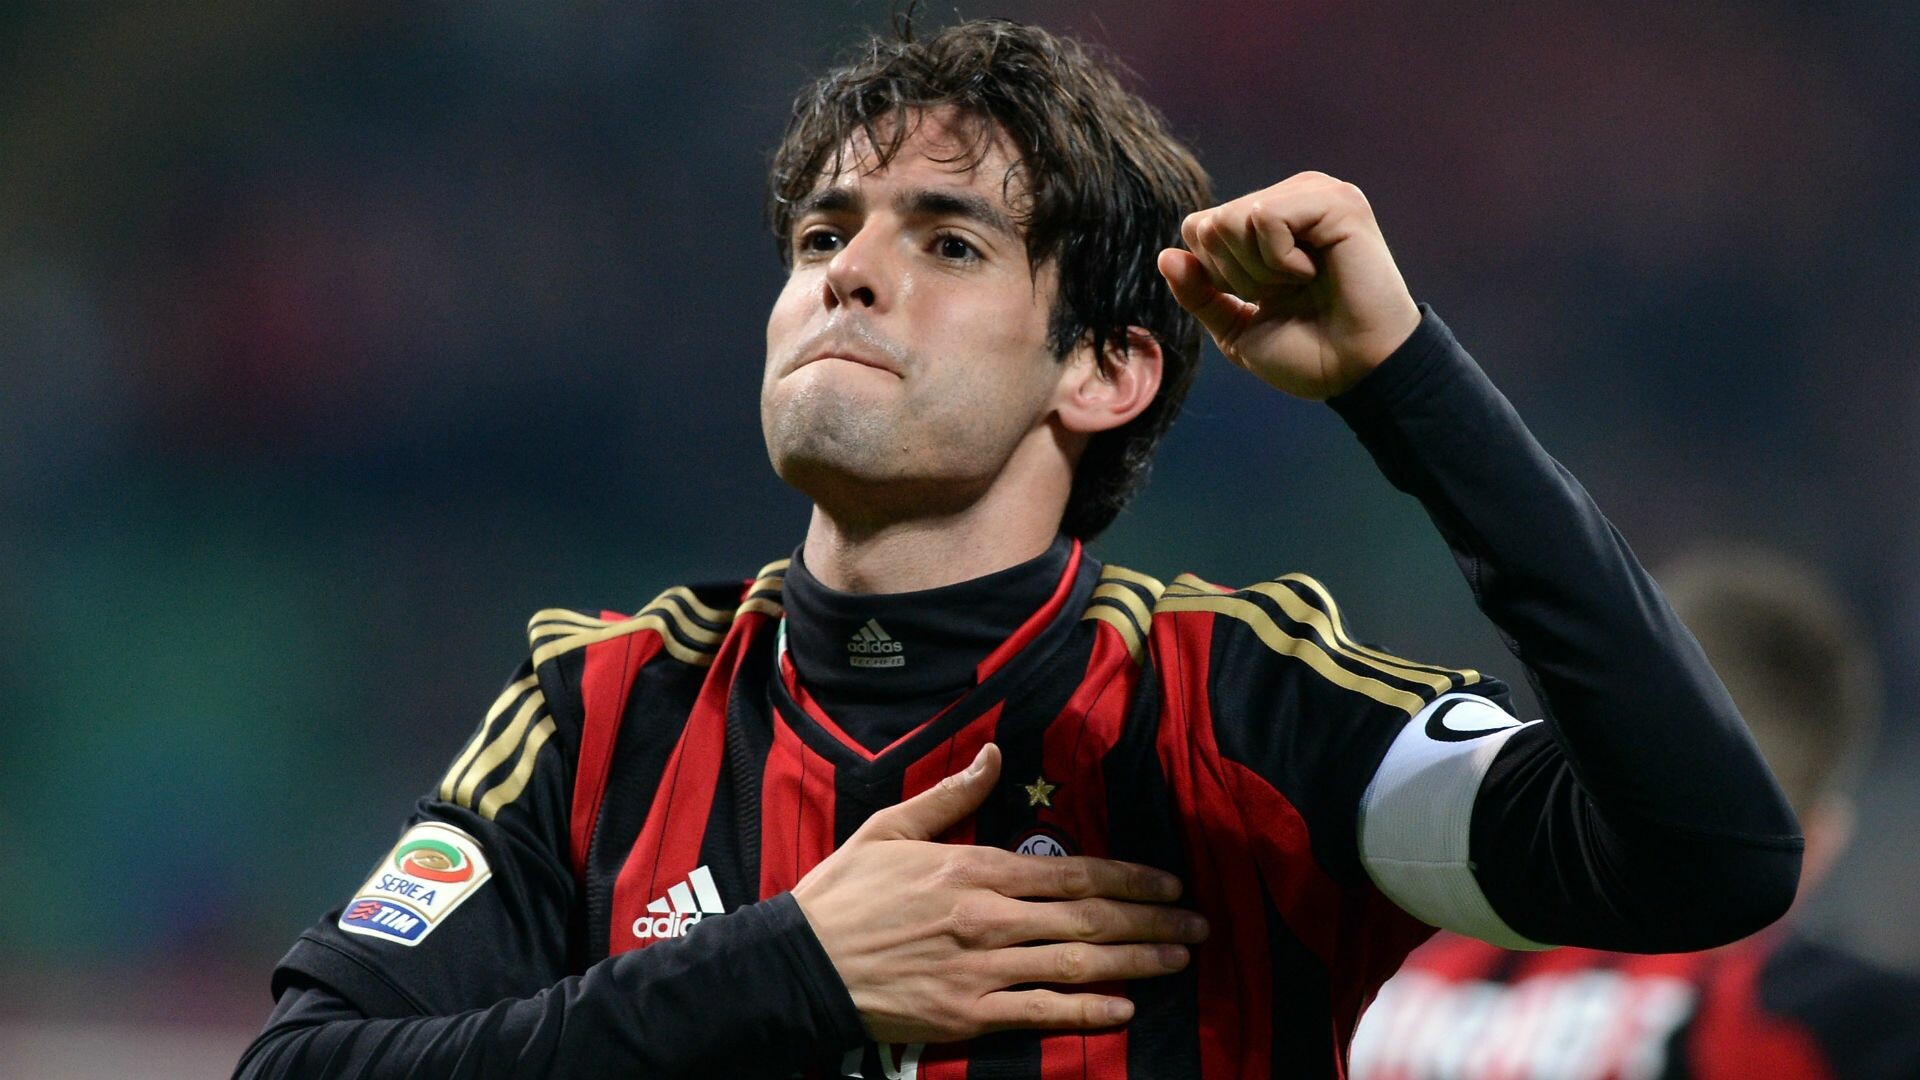 Kaká: Signed with the Italian club AC Milan in 2003 for an €8.5 million. 1920x1080 Full HD Wallpaper.